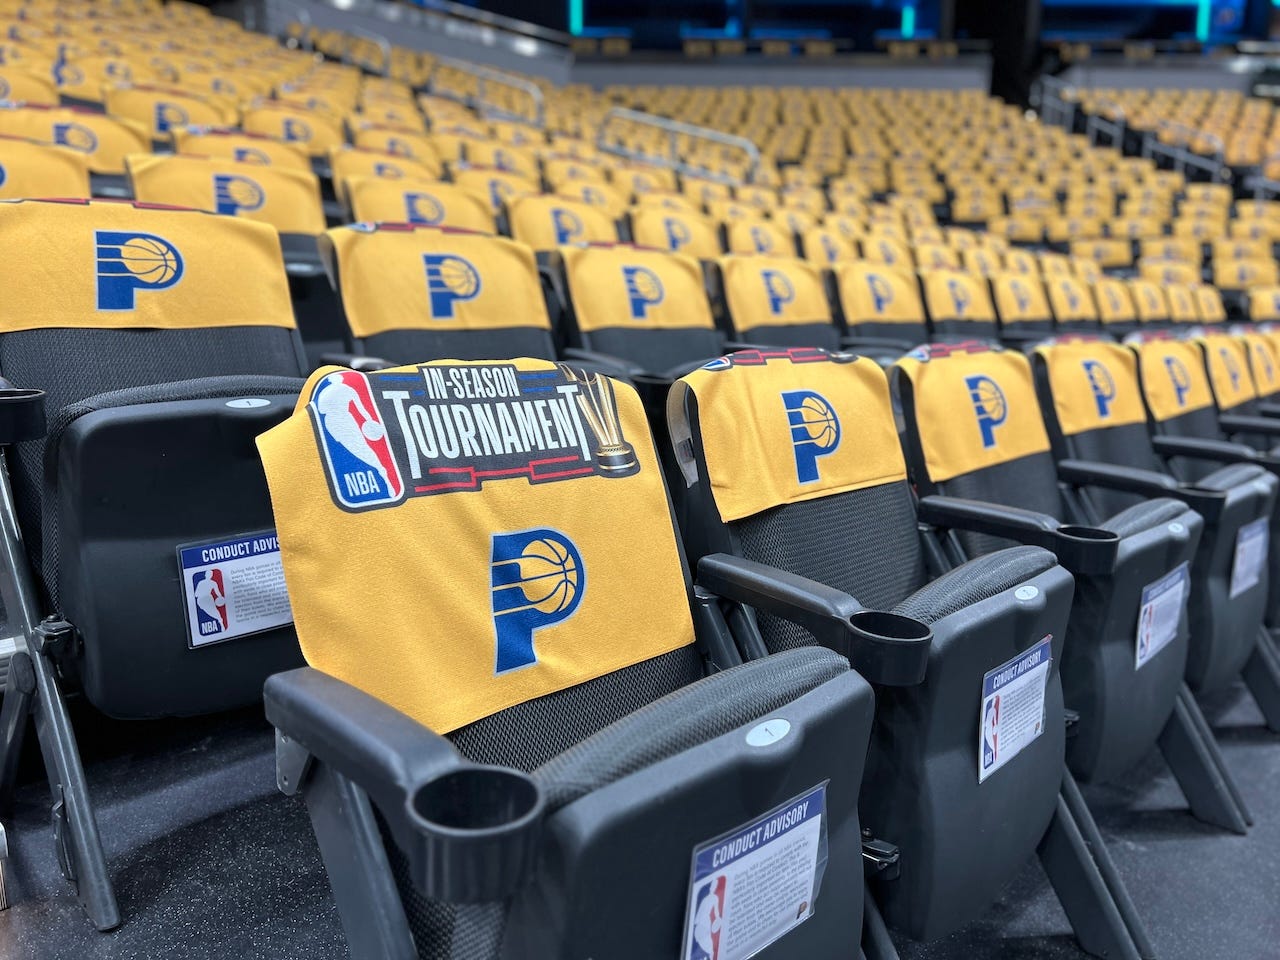 Every fan has a gold rally towel waiting for them at their seat.